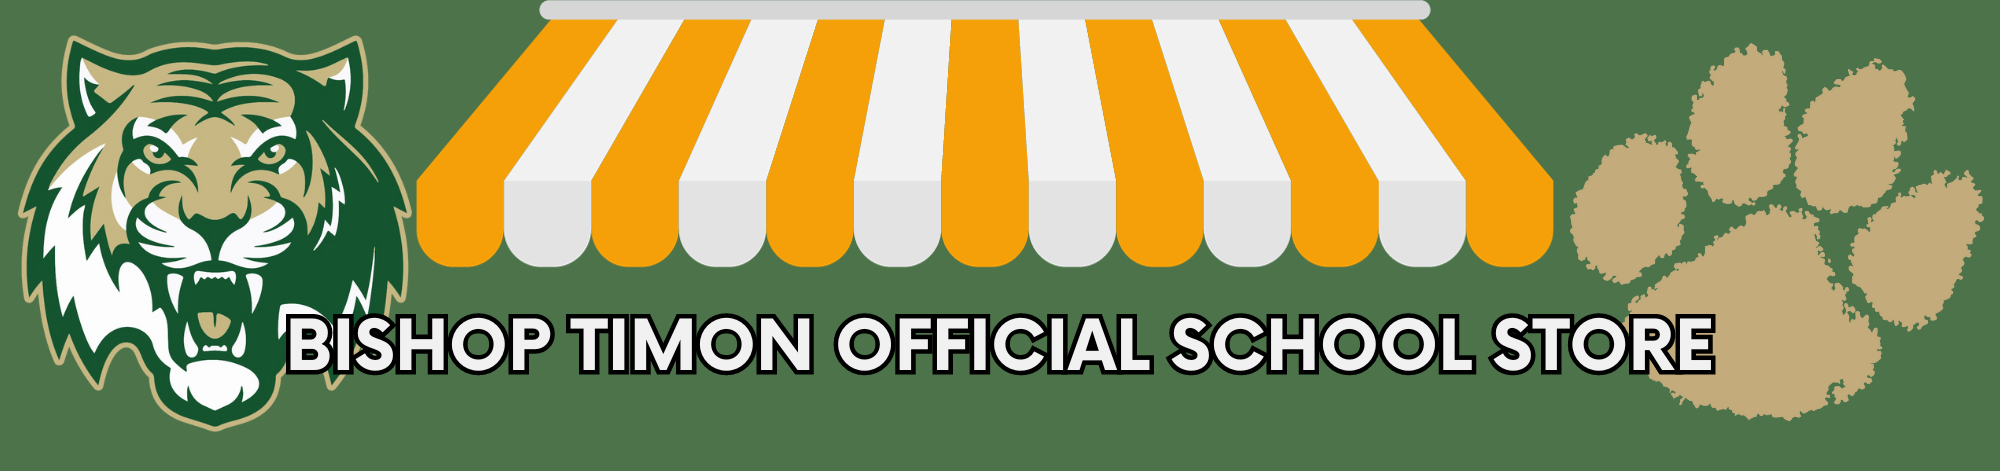 Bishop Timon - Official School Store 